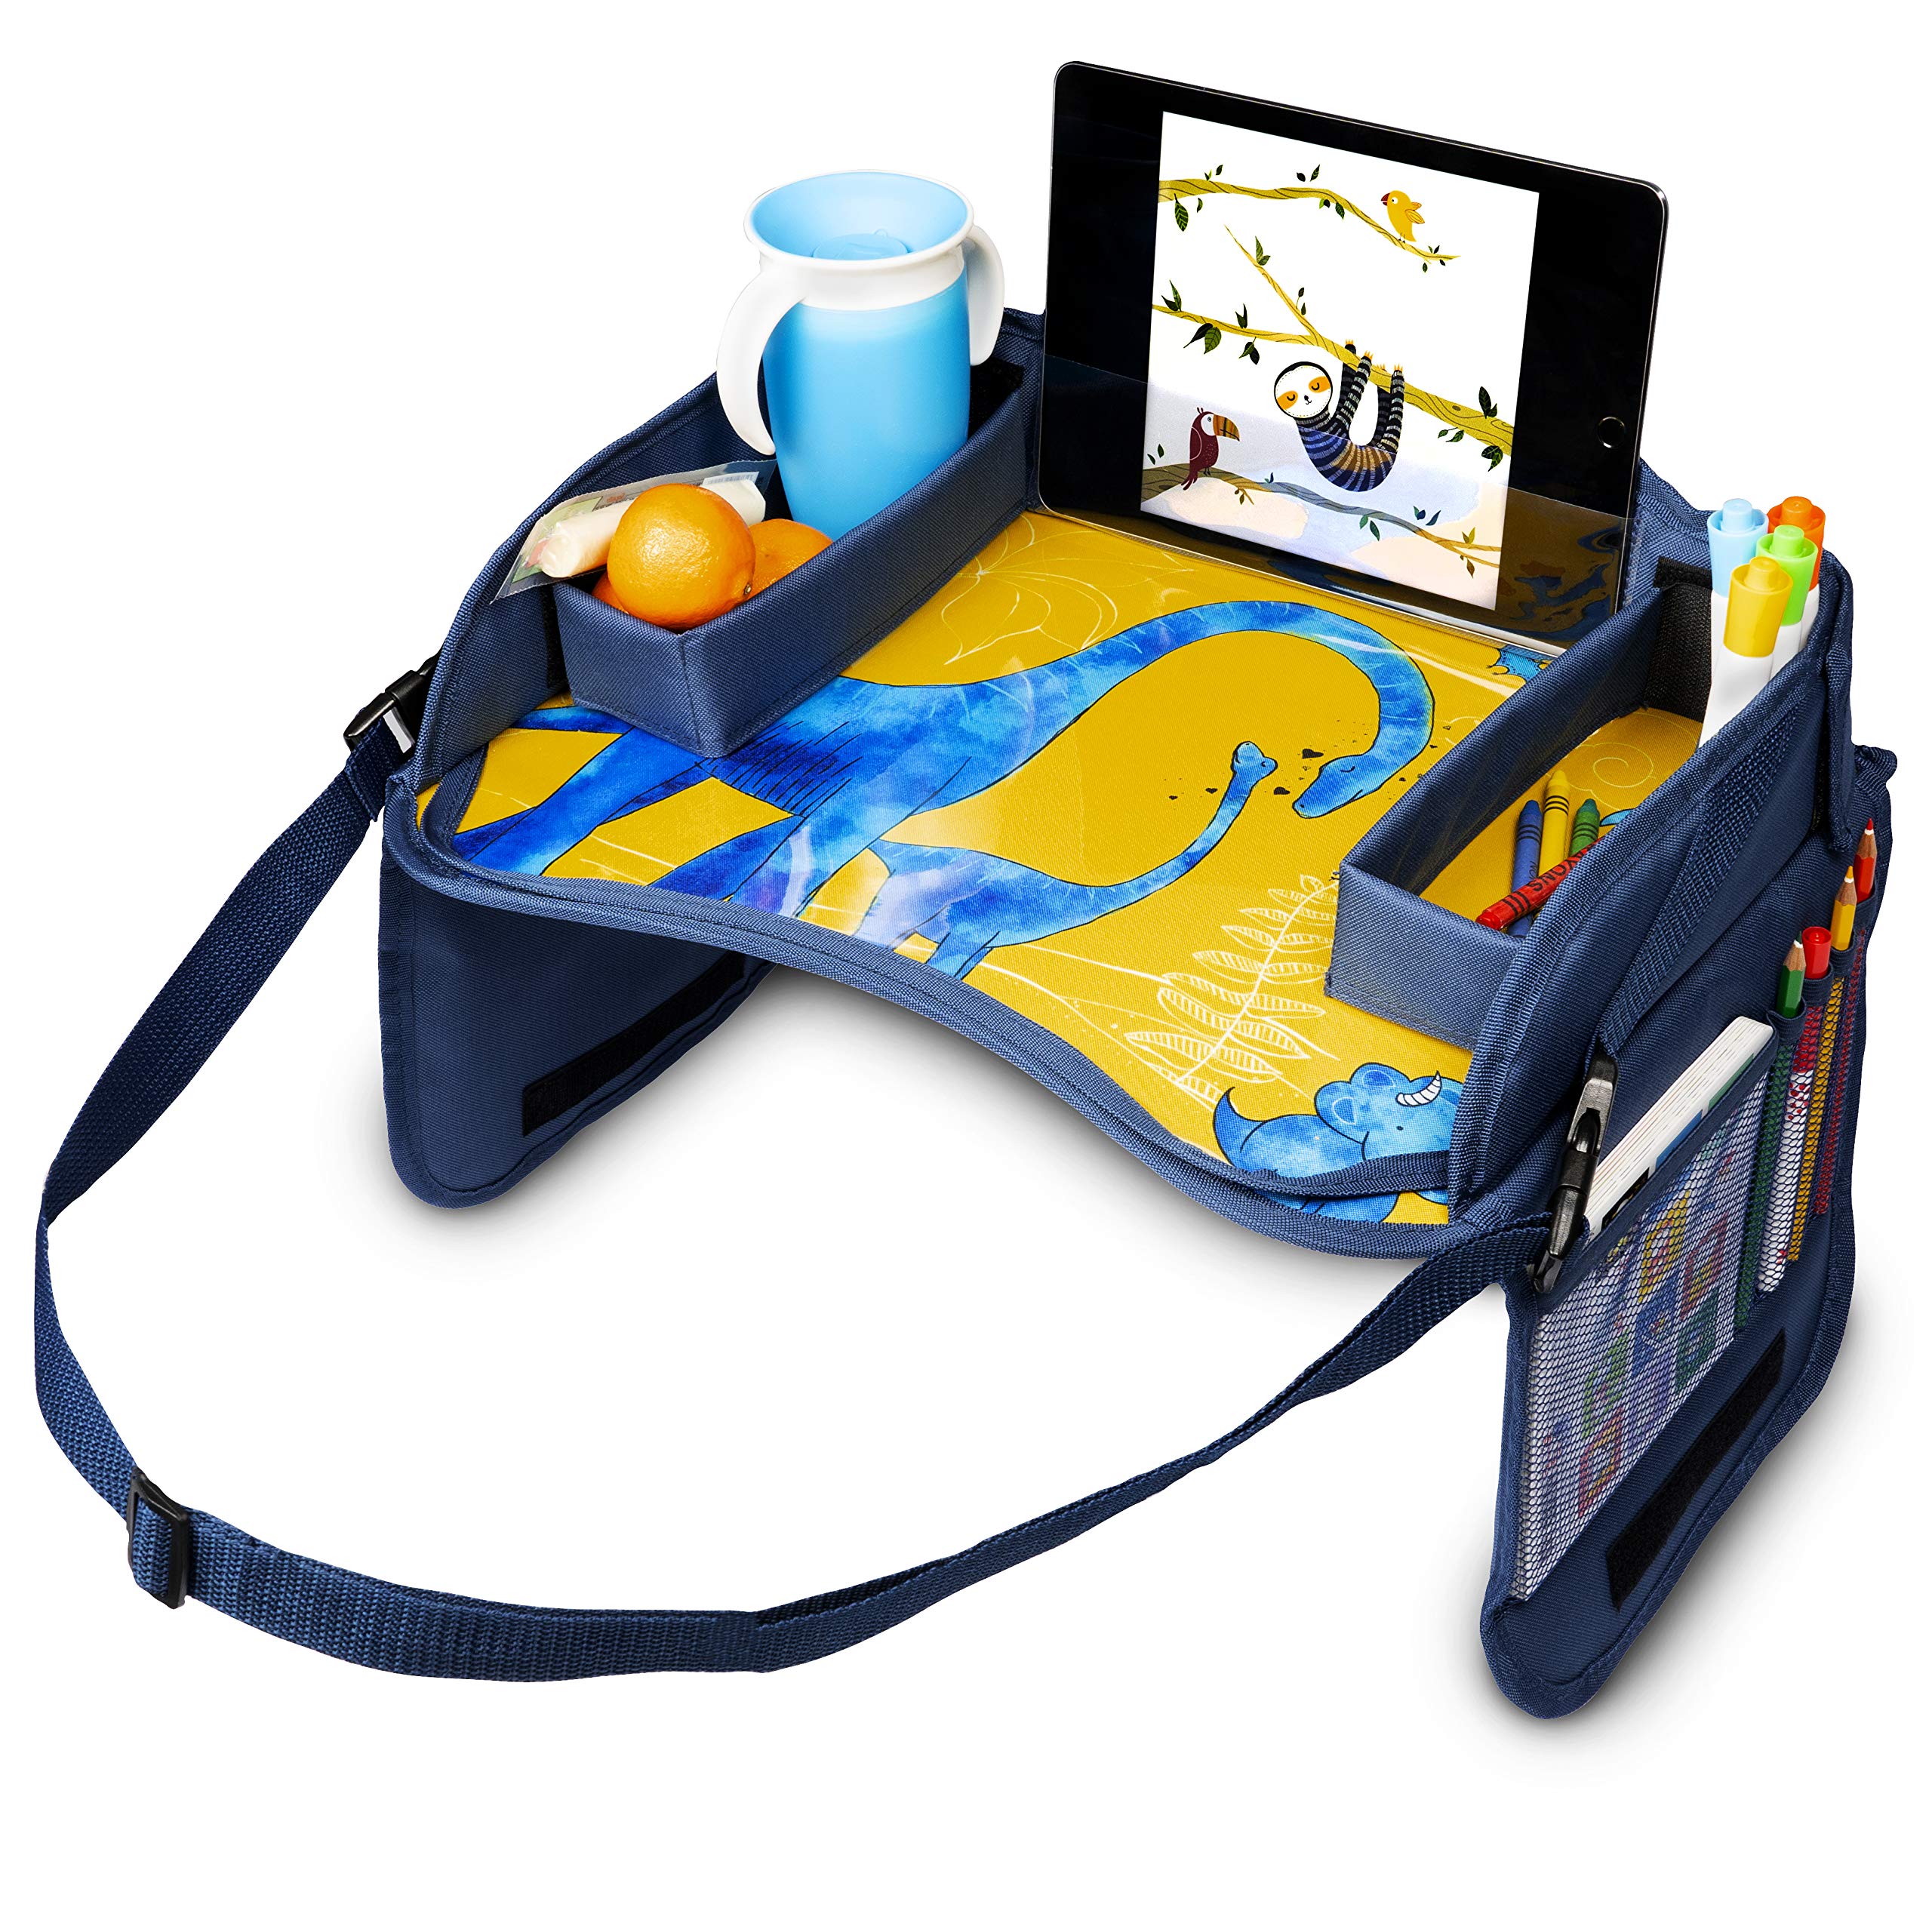 JumpOff Jo – Kids Car Seat Travel Tray, Kids Activity Tray, Activities for Travel, Cars, and Tables, Tablet Holder for Kids in The Car, 17" x 12” - Blue Dinosaurs